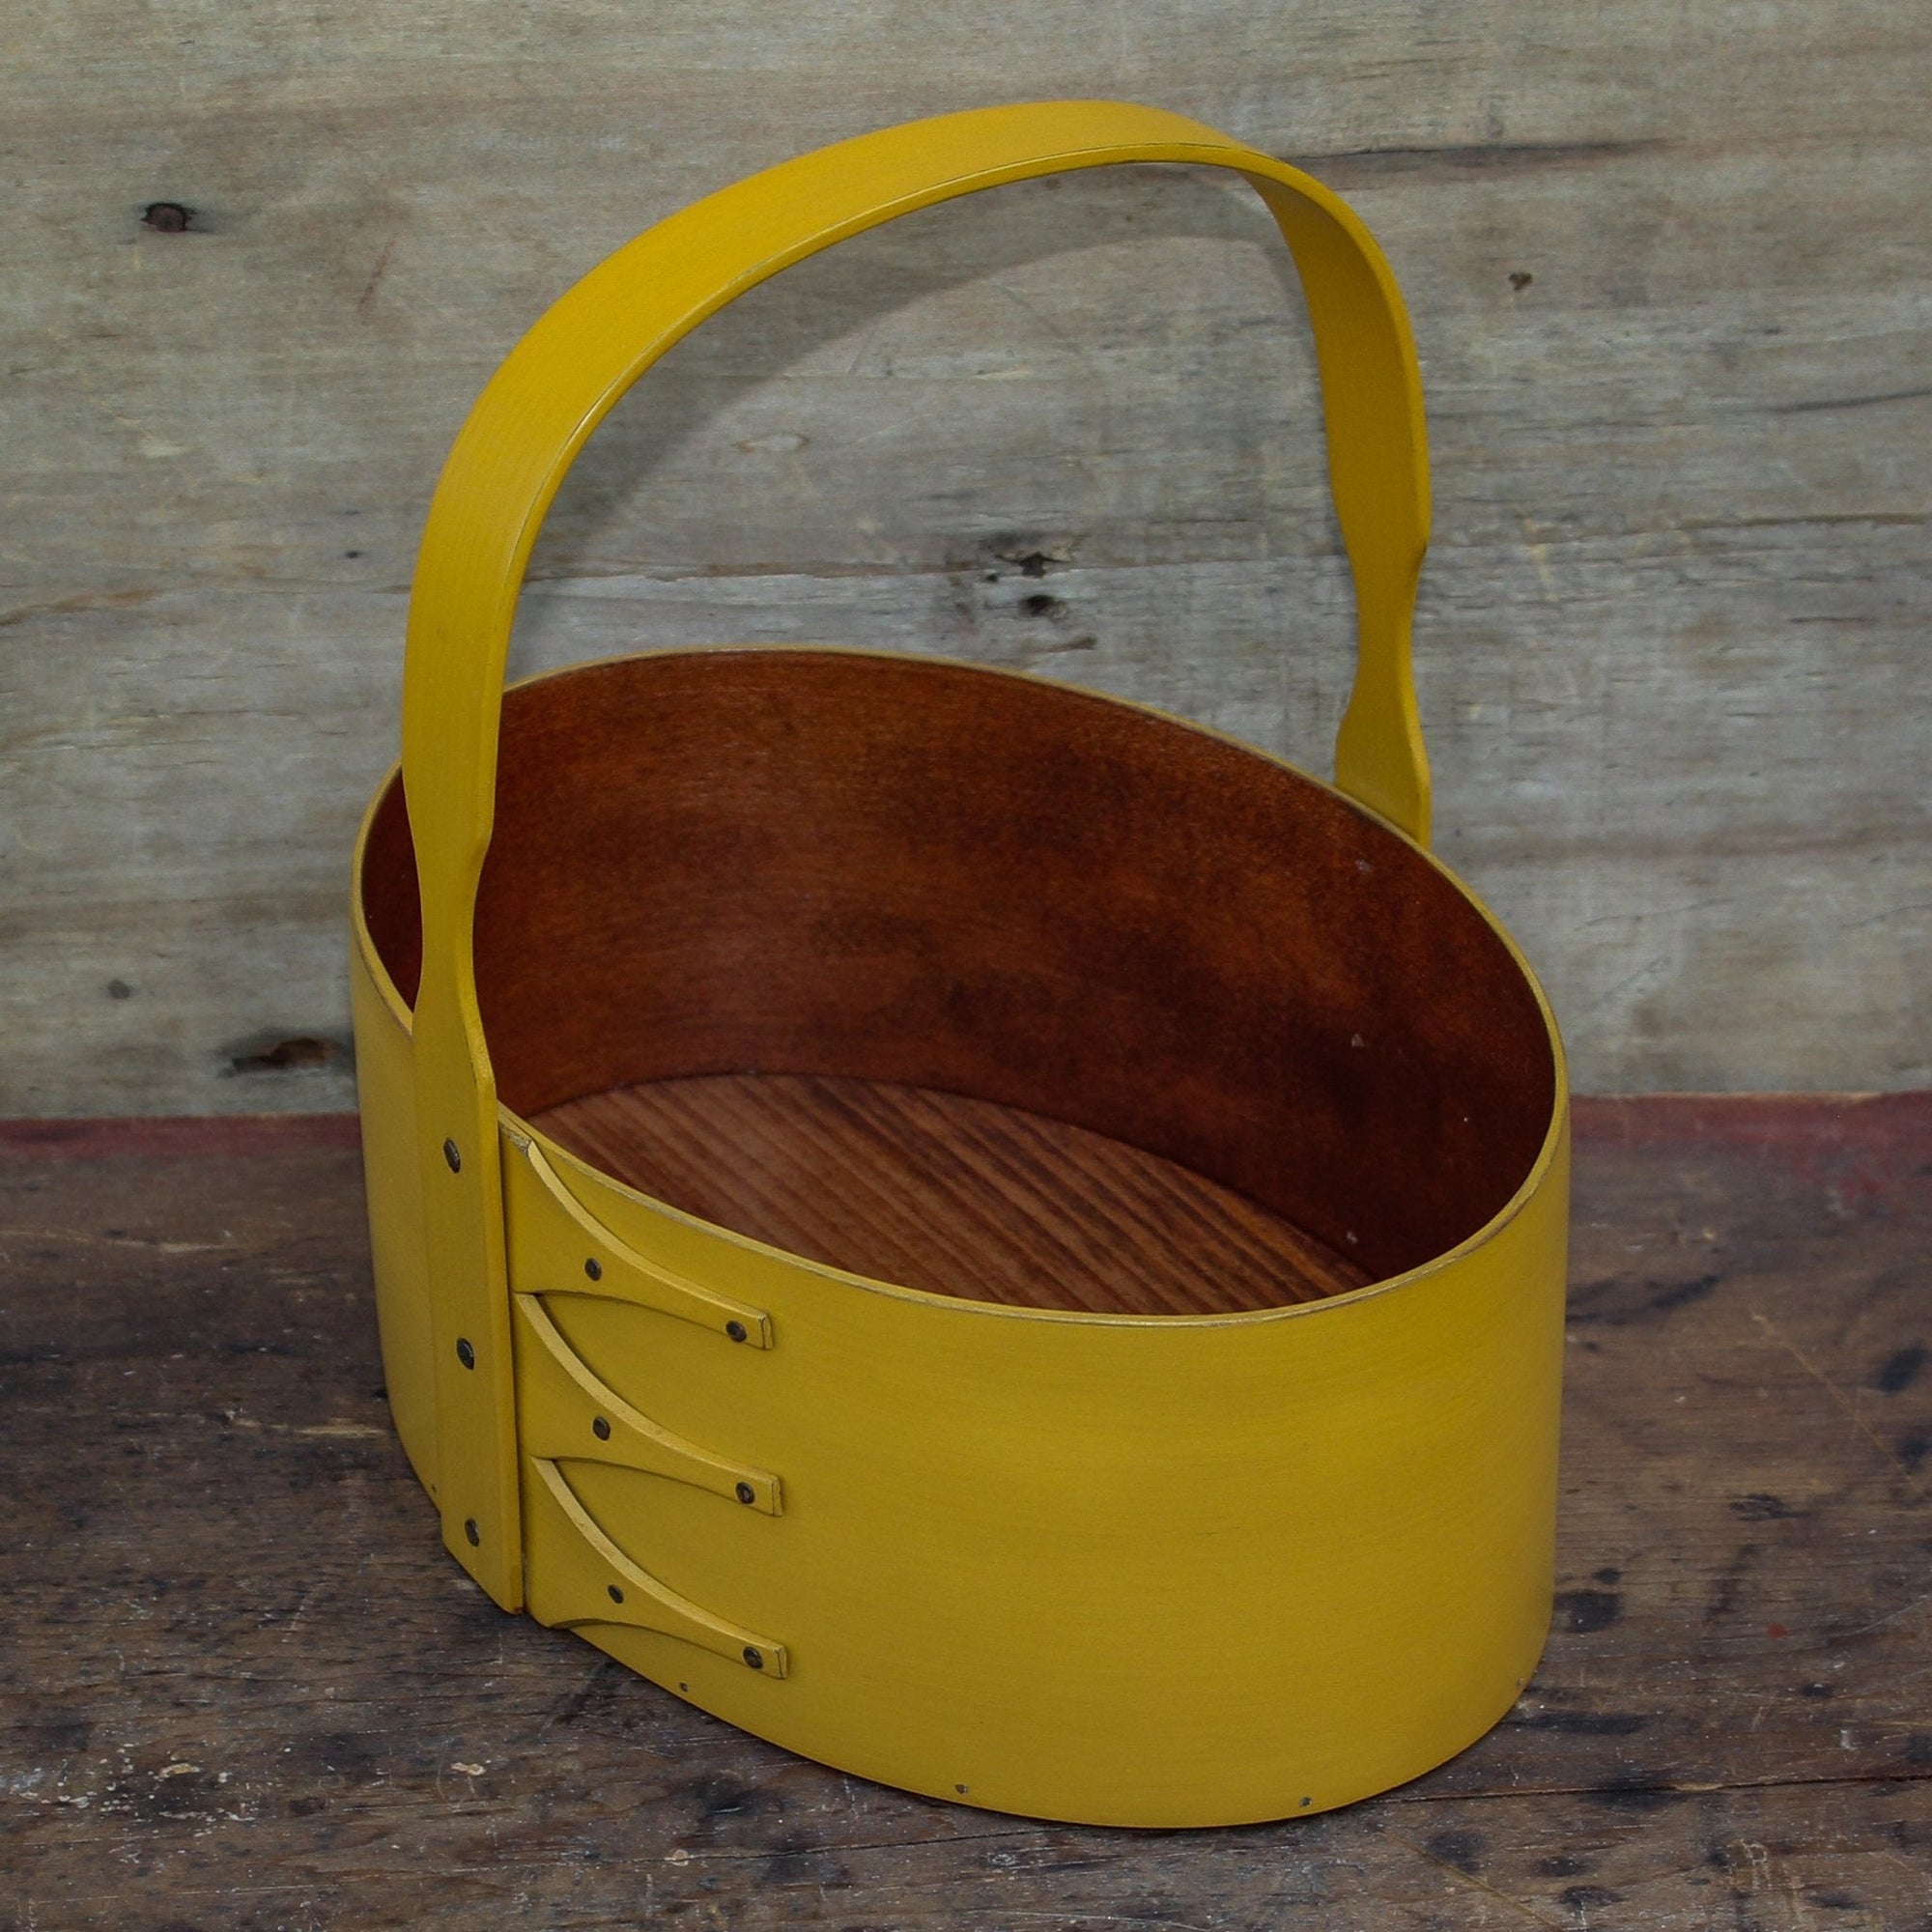 Shaker Carrier, Size #5, LeHays Shaker Boxes, Handcrafted in Maine, Yellow Milk Paint Finish, Side View